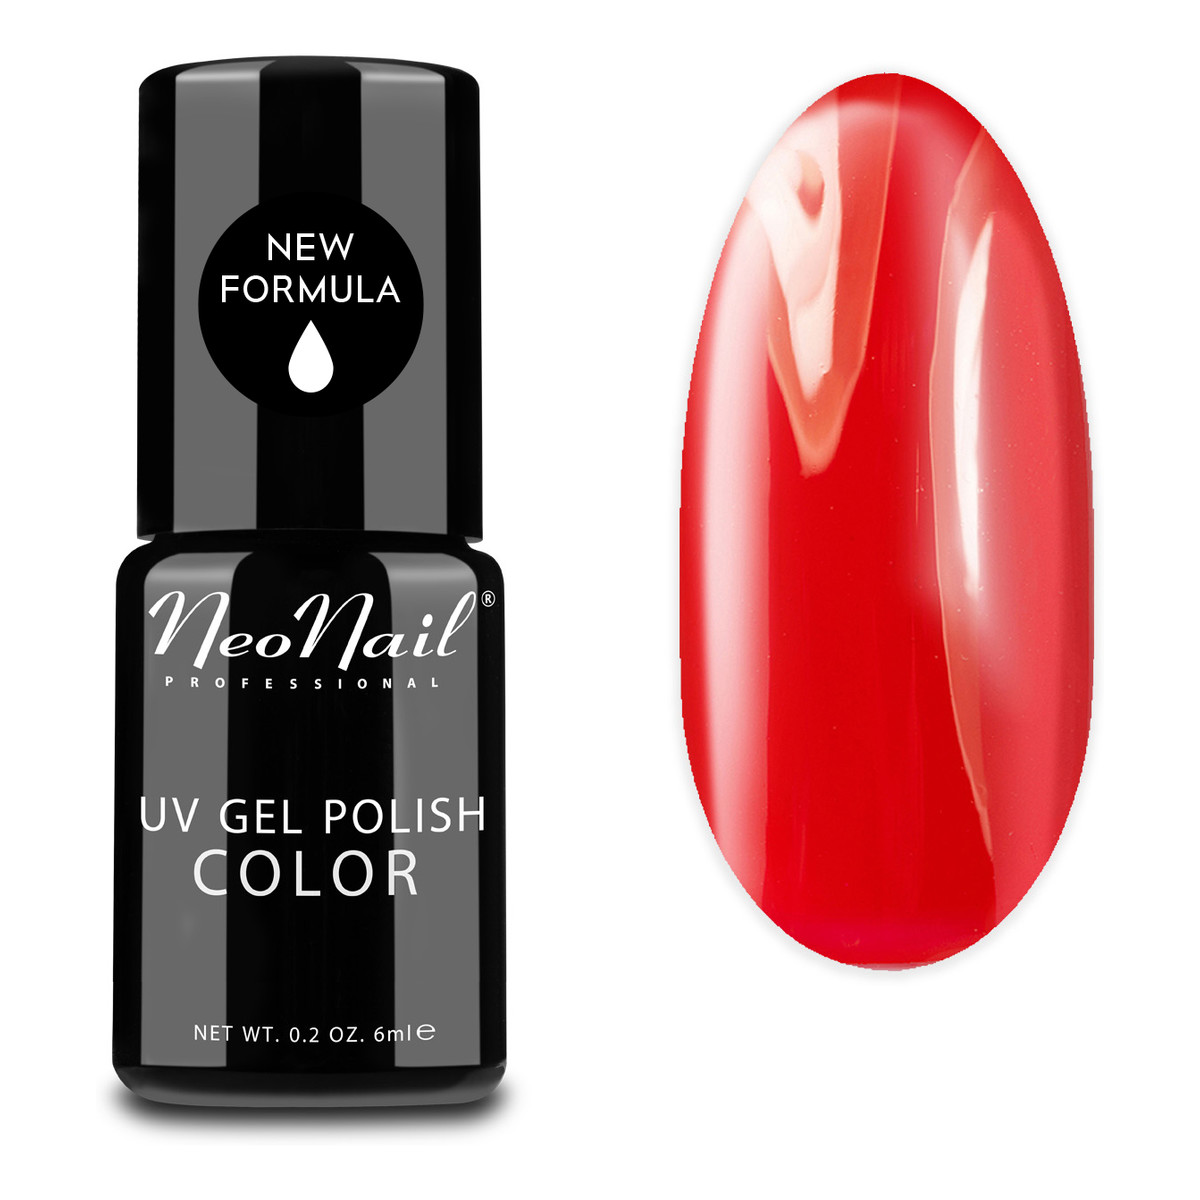 NeoNail Lady In Red Lakier Hybrydowy Coral Red (2619-1) 6ml